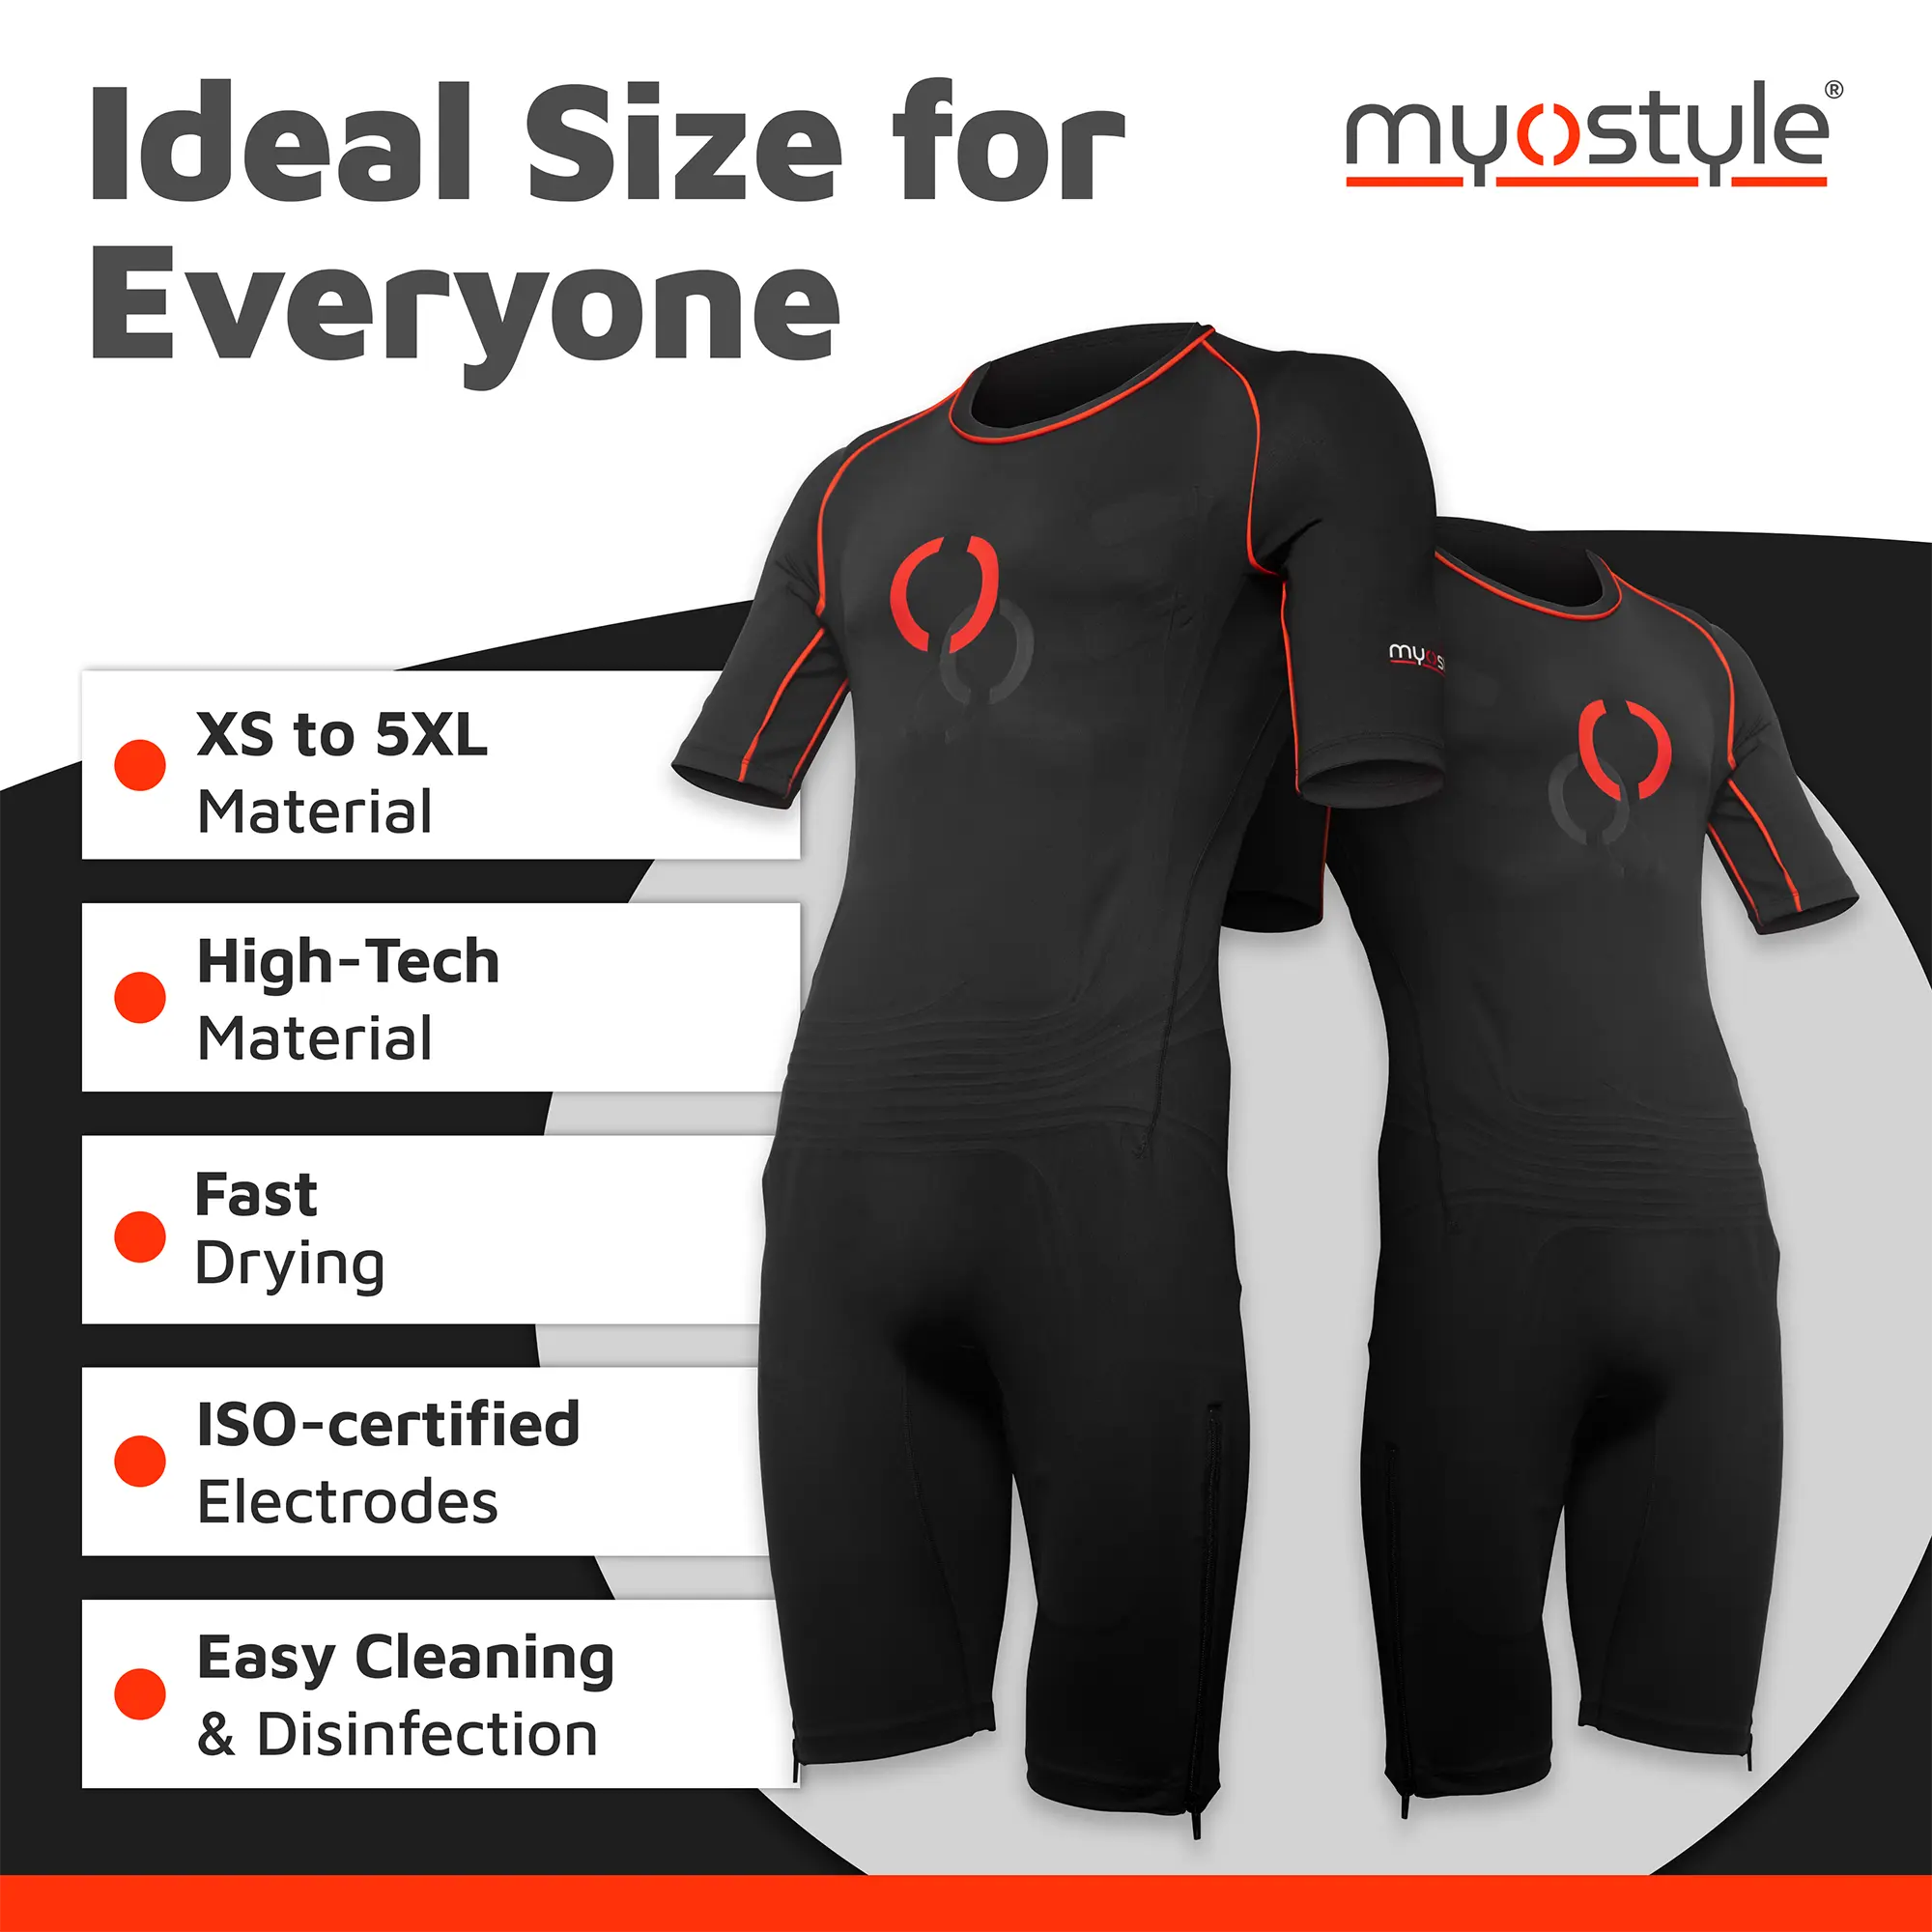 The wireless myostyle ems training suit showing different size options and its product properties.